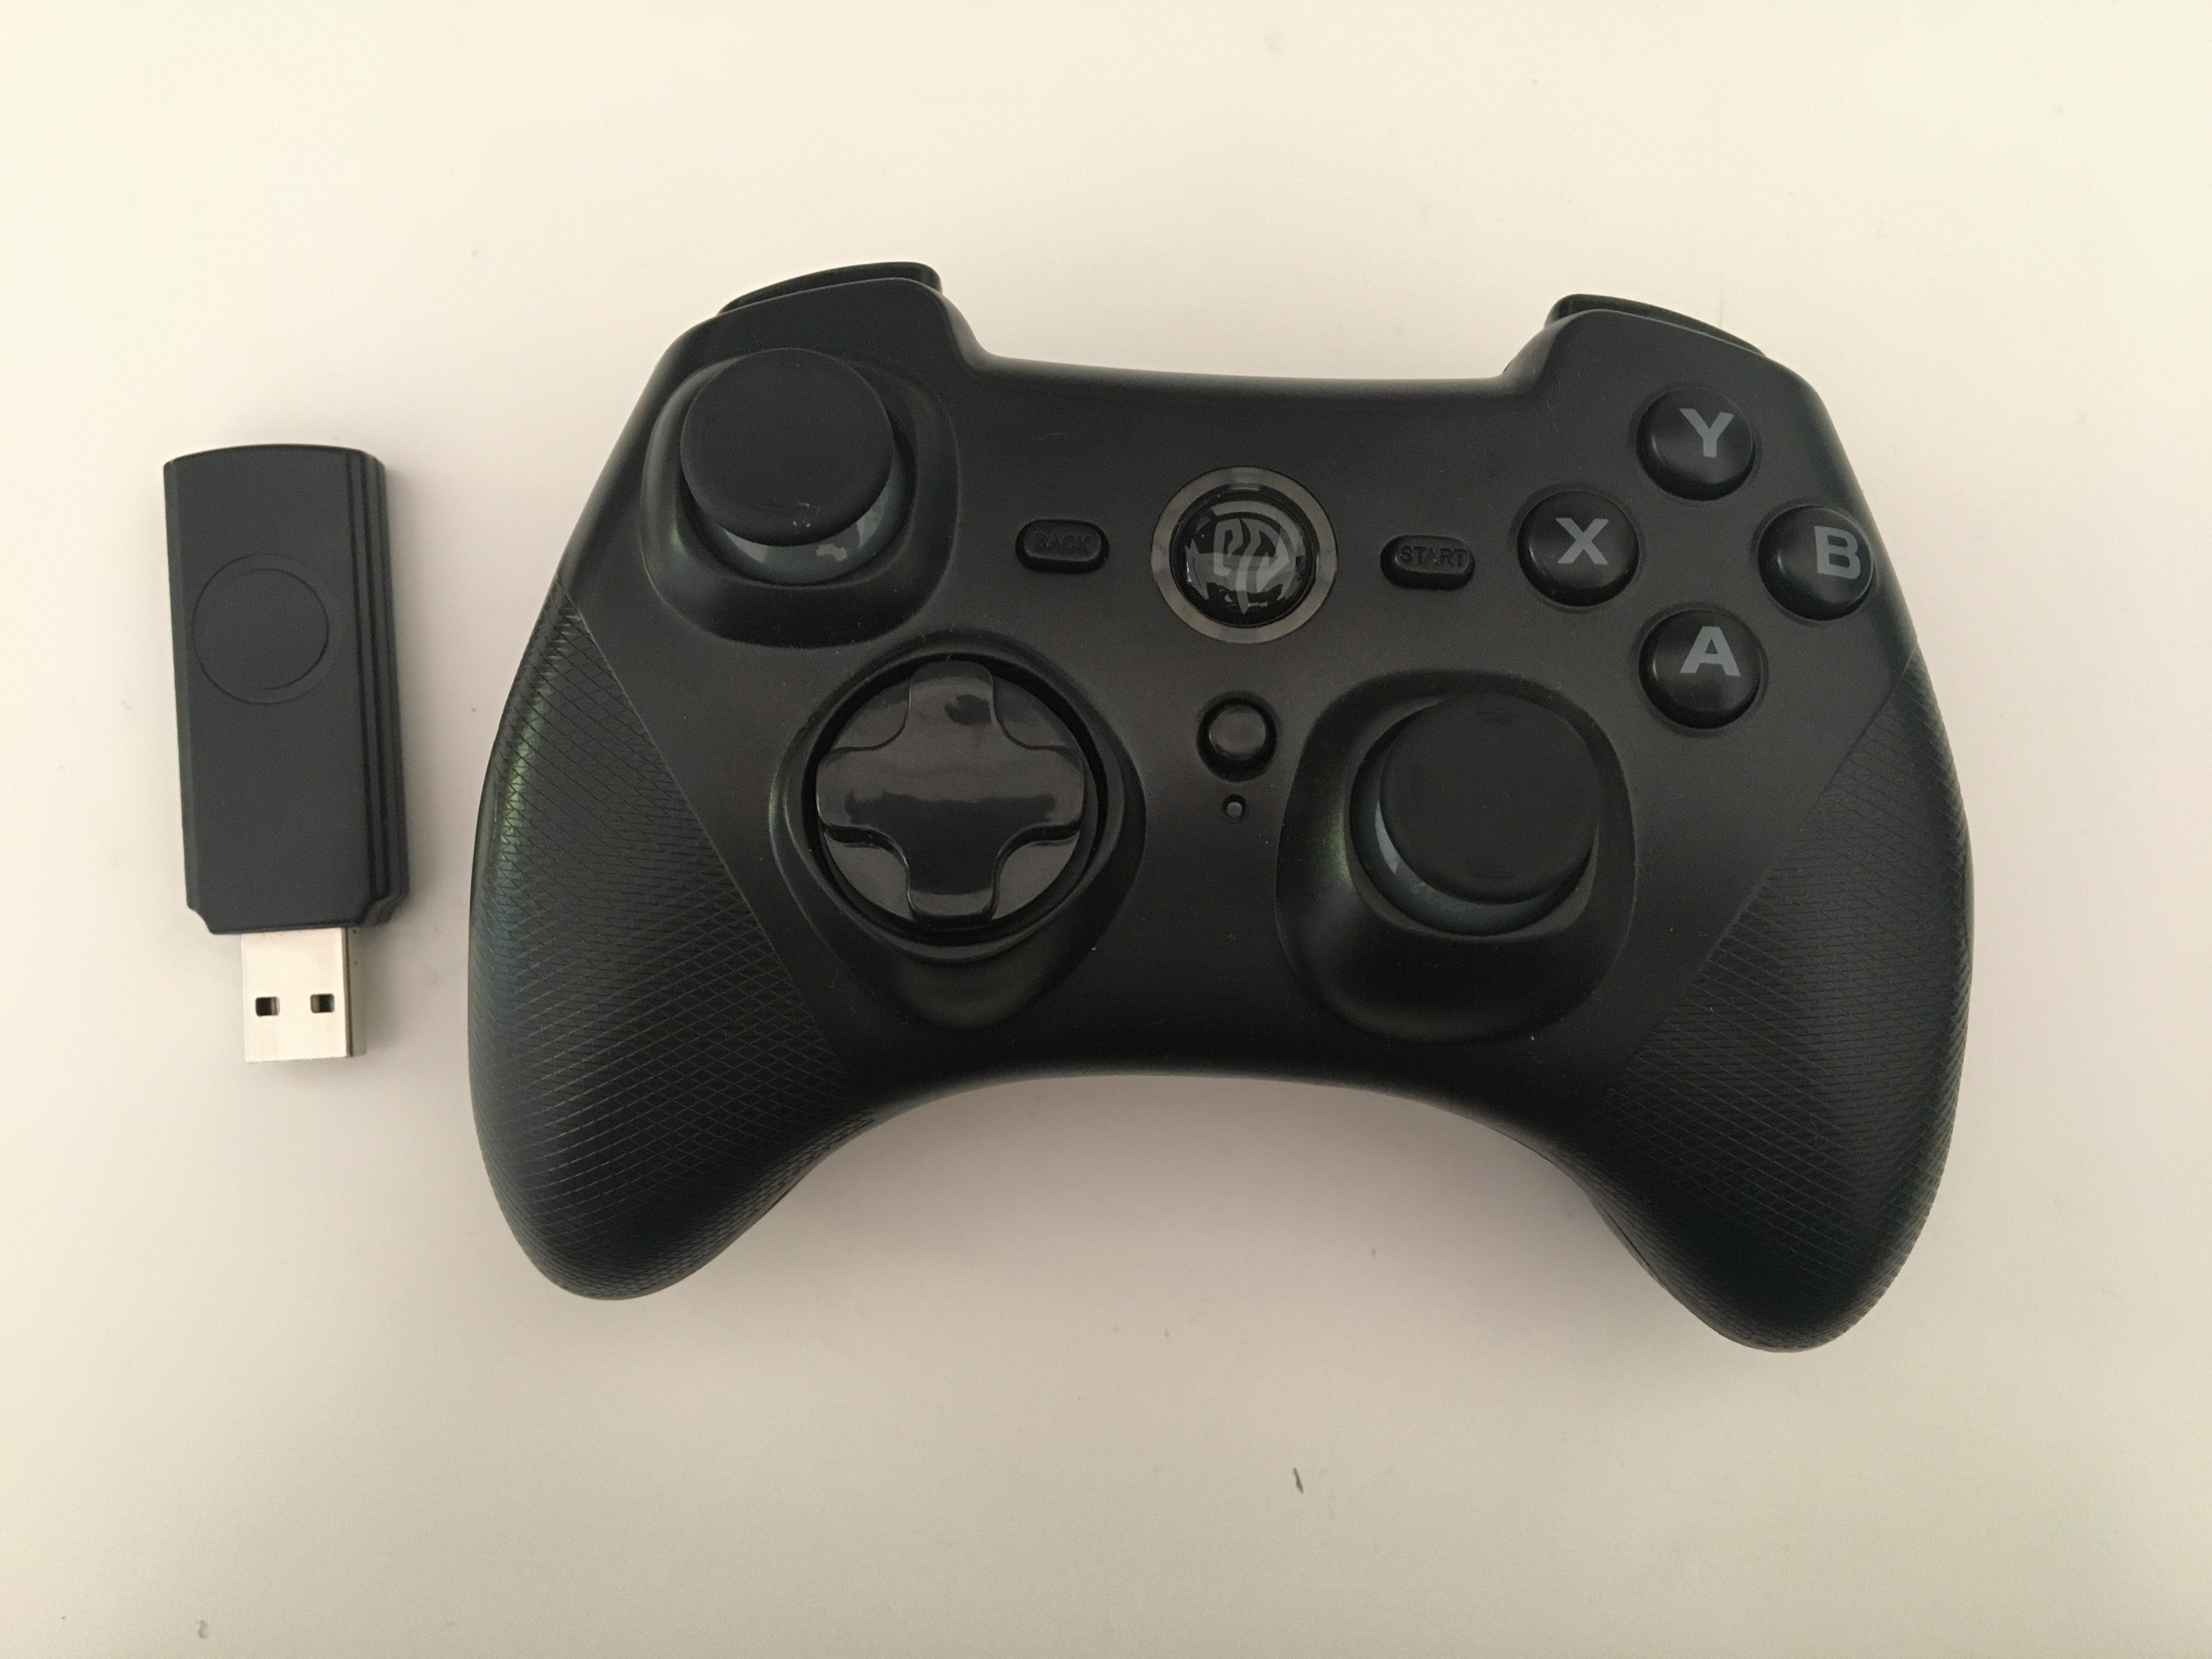 EasySMX gamepad with USB receiver on the left